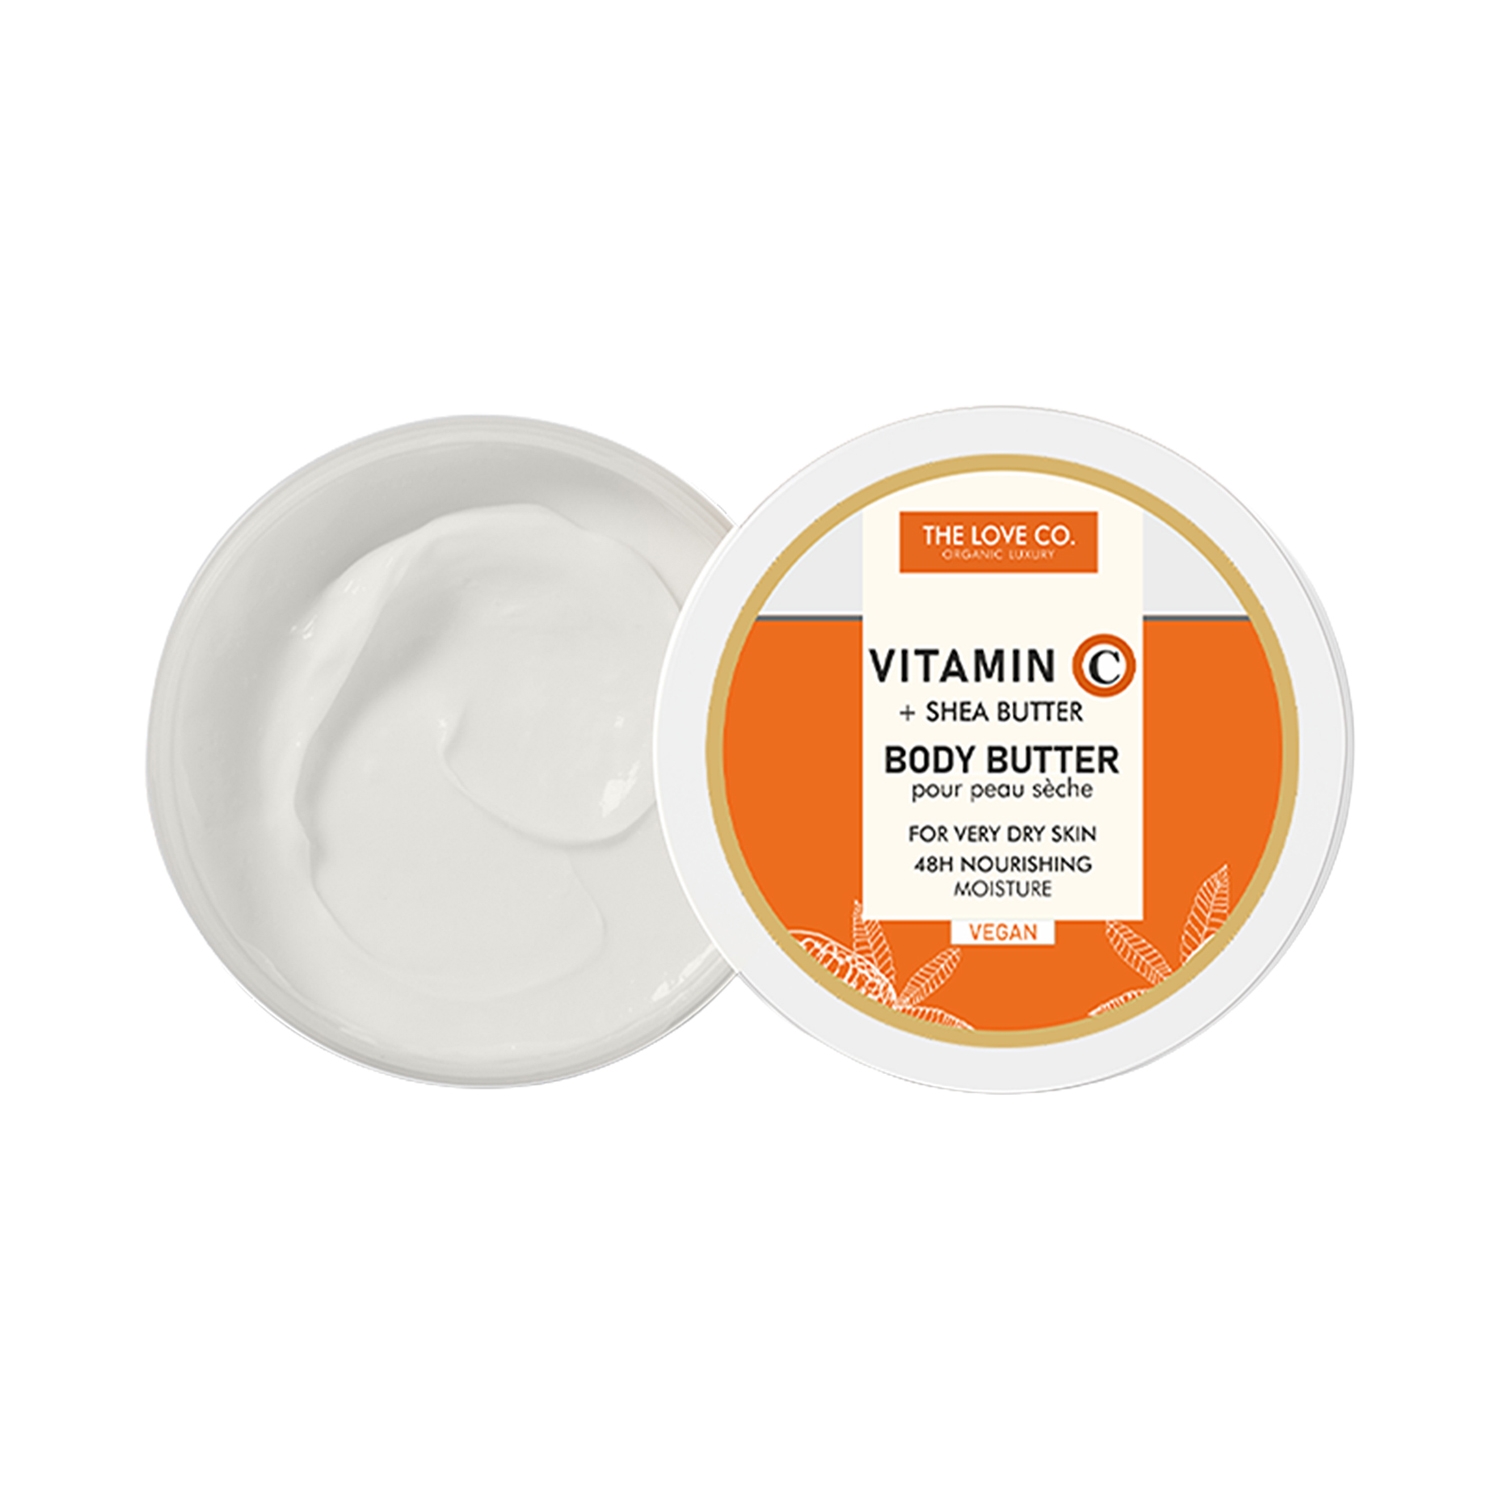 THE LOVE CO. | THE LOVE CO. Vitamin C Body Butter Deep Moisturization With Pure Shea Butter (200g)